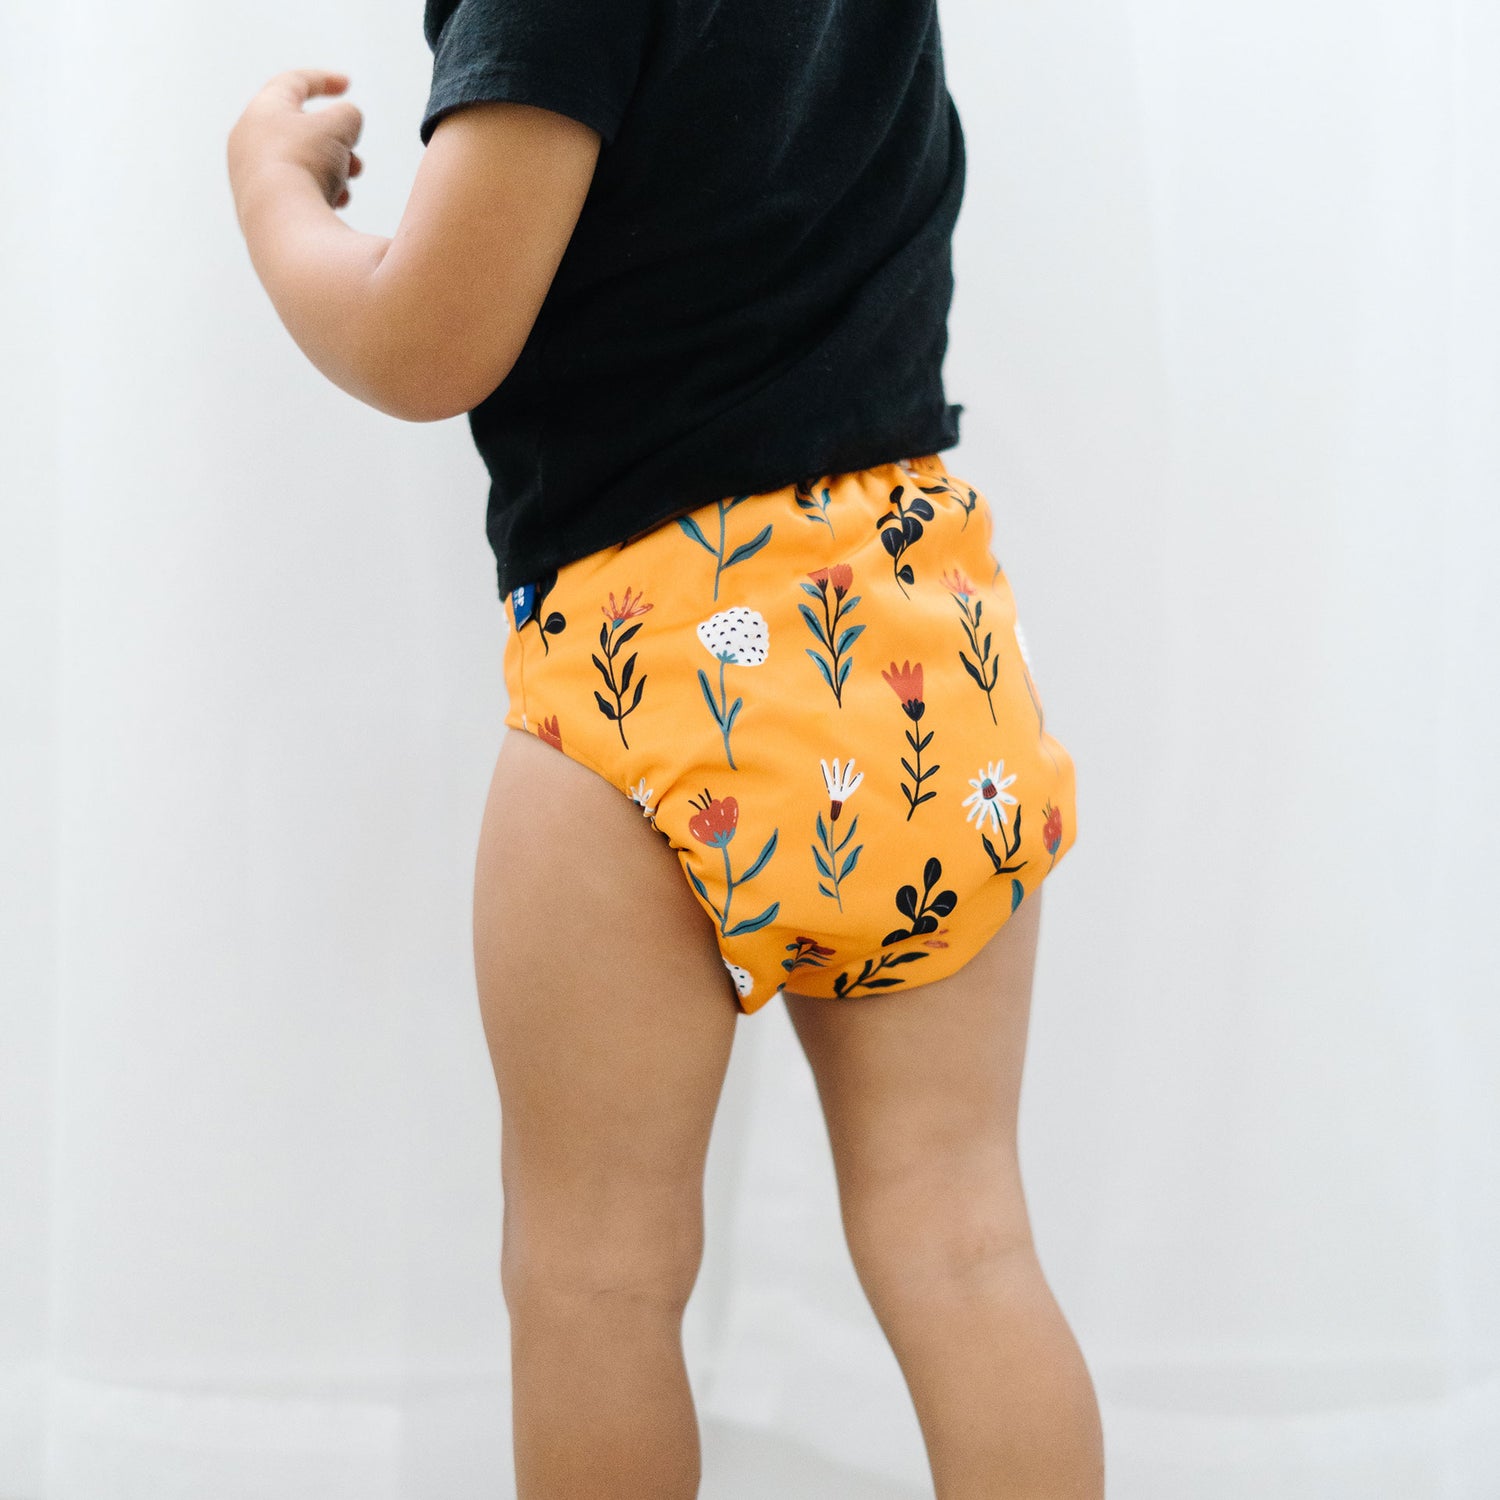 modern reusable diapers with flowers yellow cloth diapers with athletic wicking jersey best pocket diapers